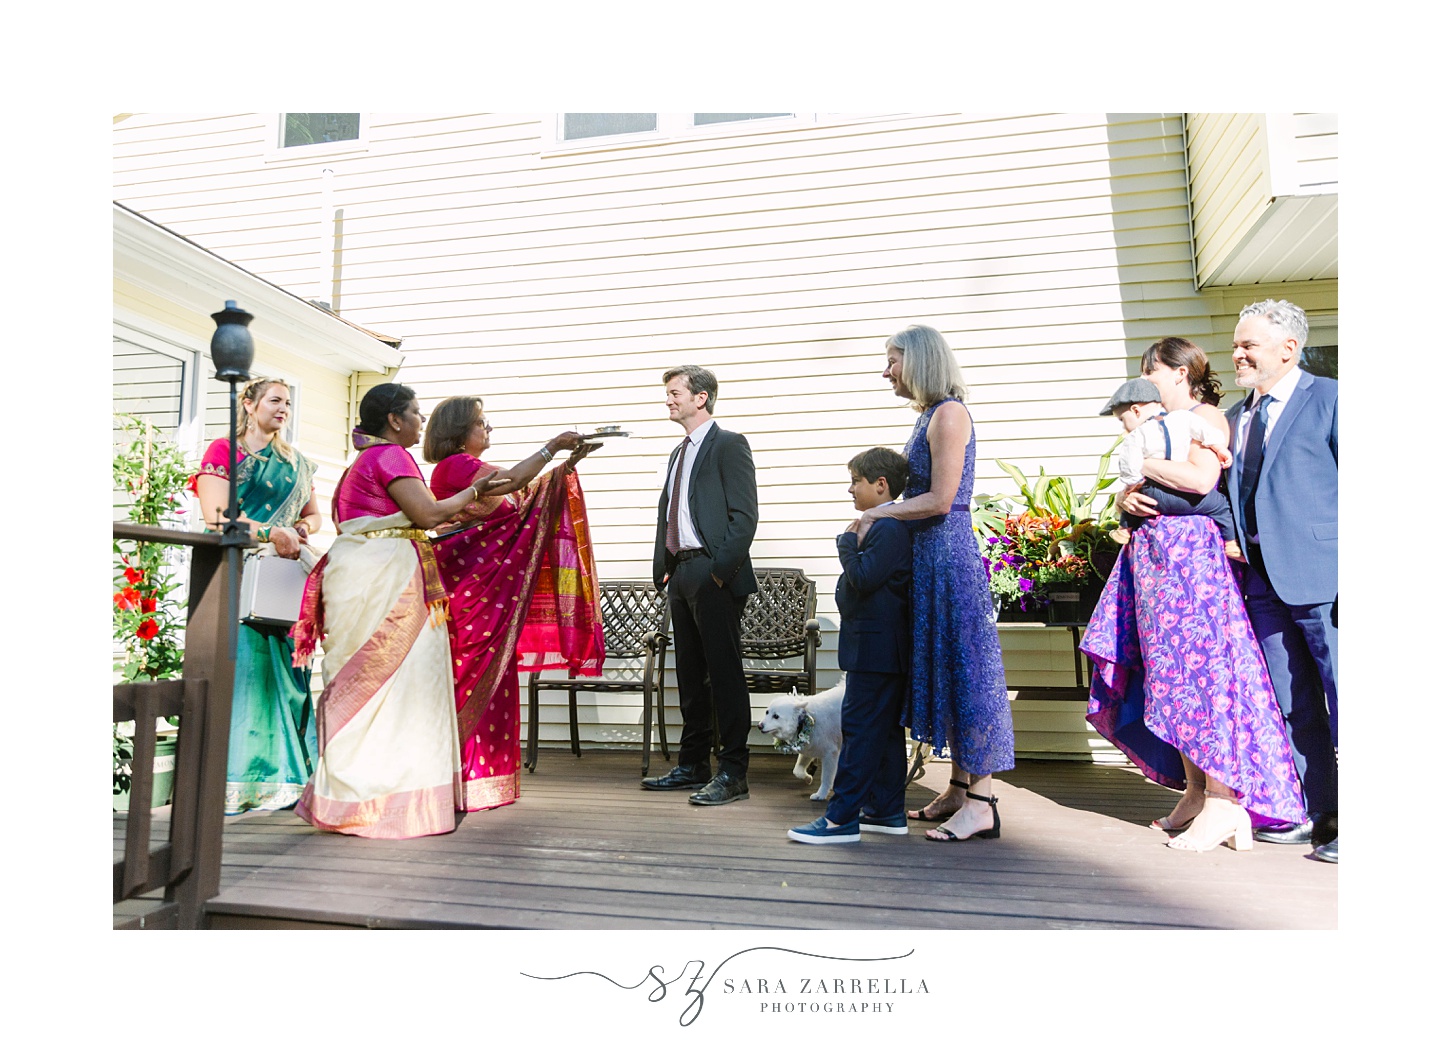 family enters home for traditional Hindu wedding ceremony 